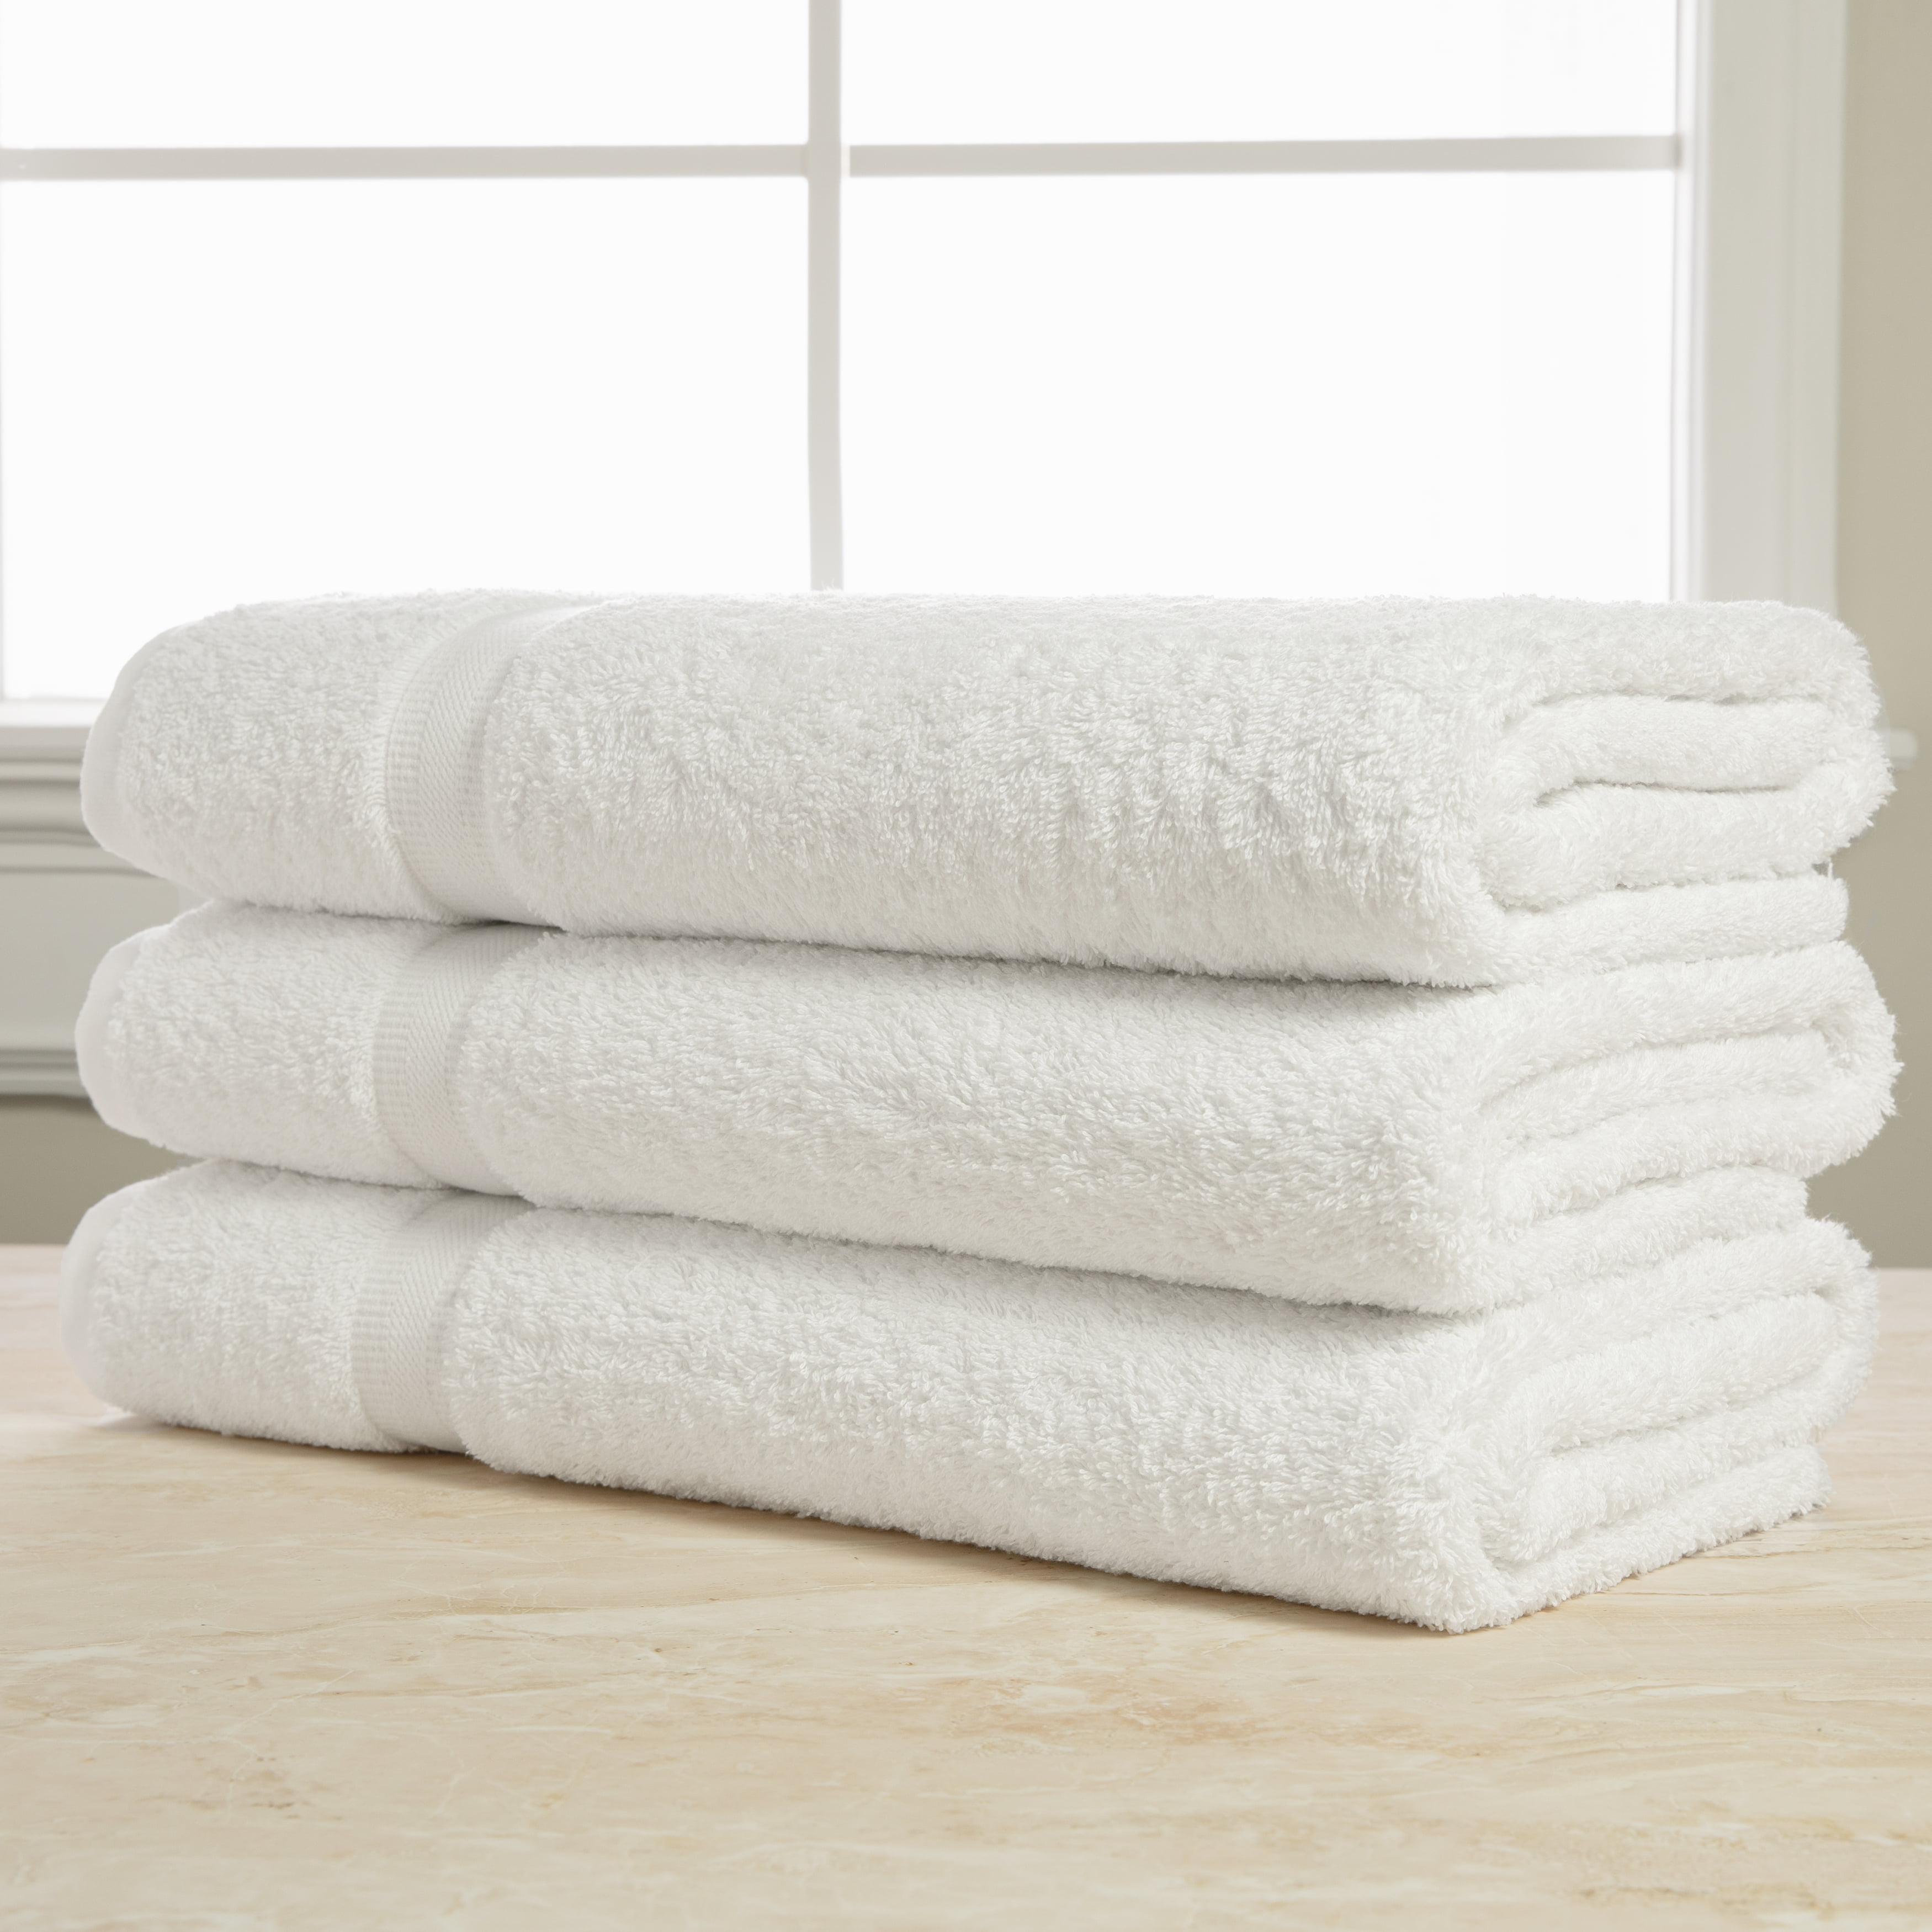 Williams Bay Gold Hotel Towels, 100% Cotton